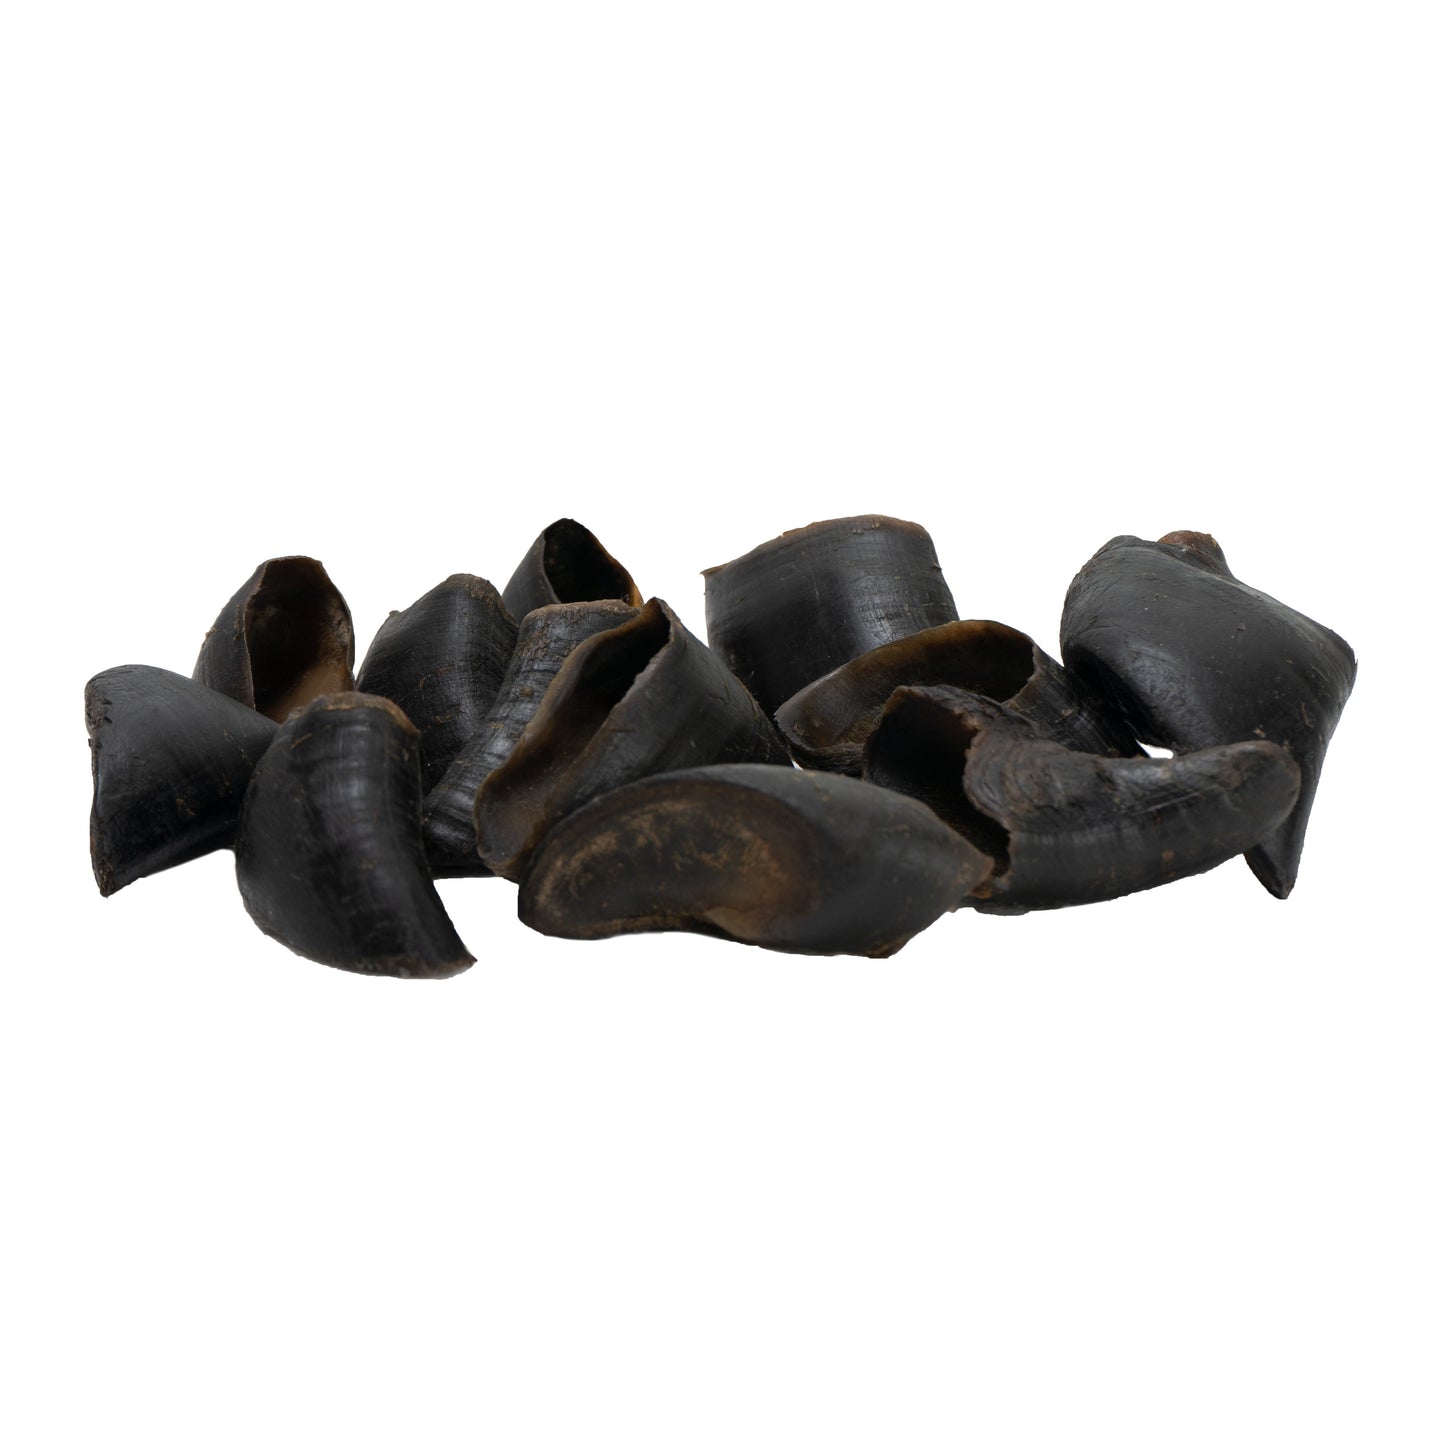 Water Buffalo Hooves - 25/27 Count